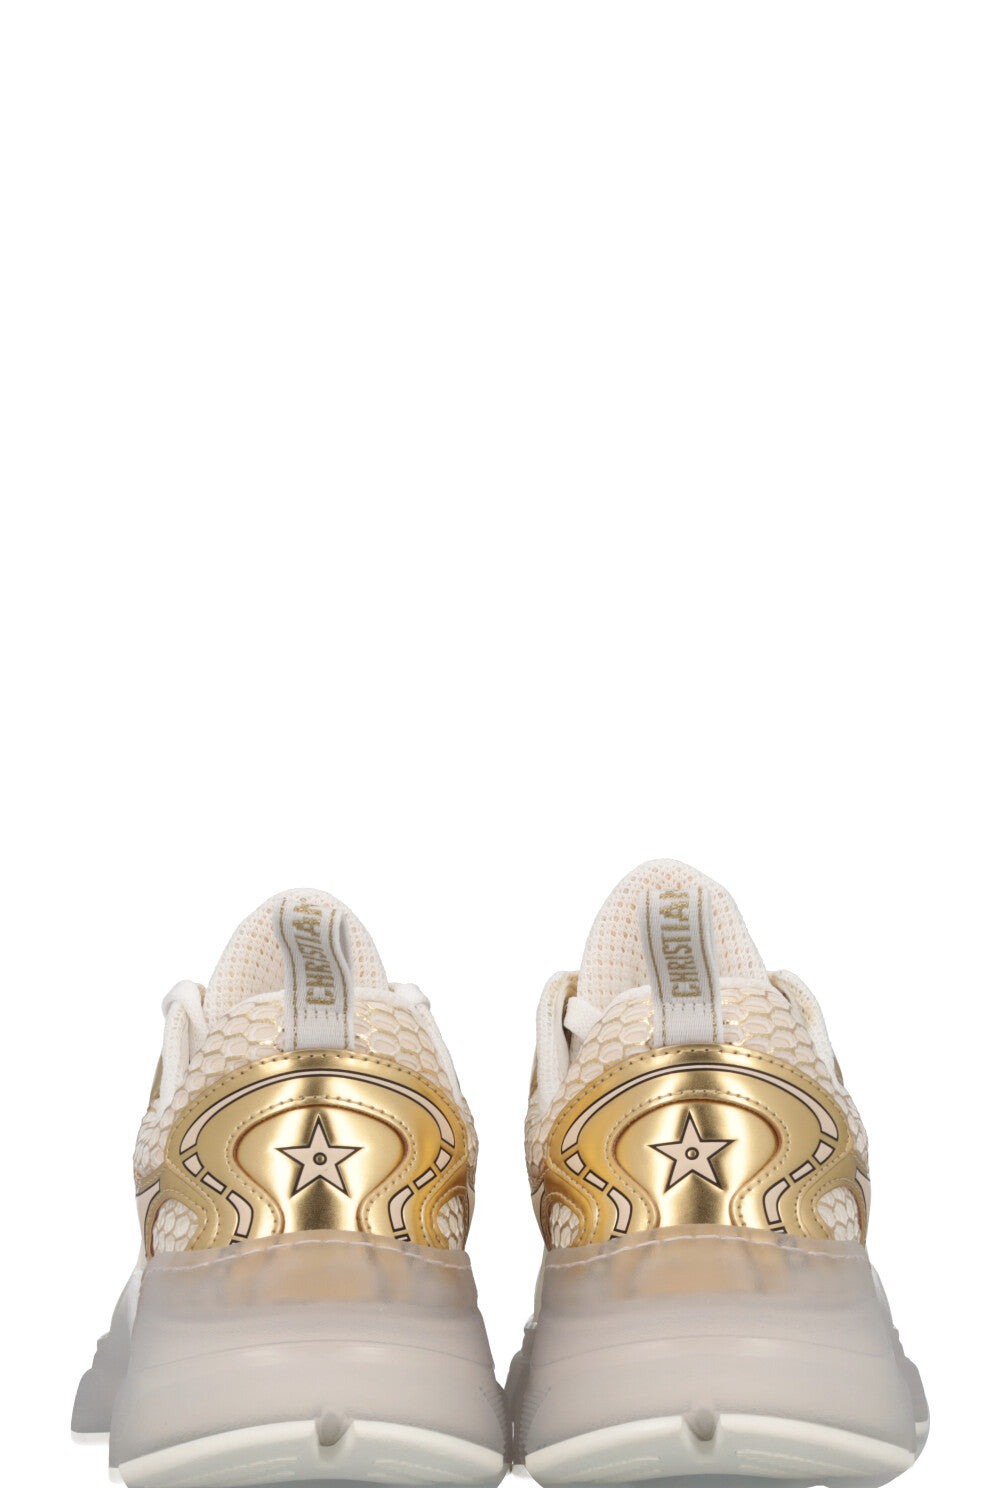 CHRISTIAN DIOR Vibe Sneakers White Gold